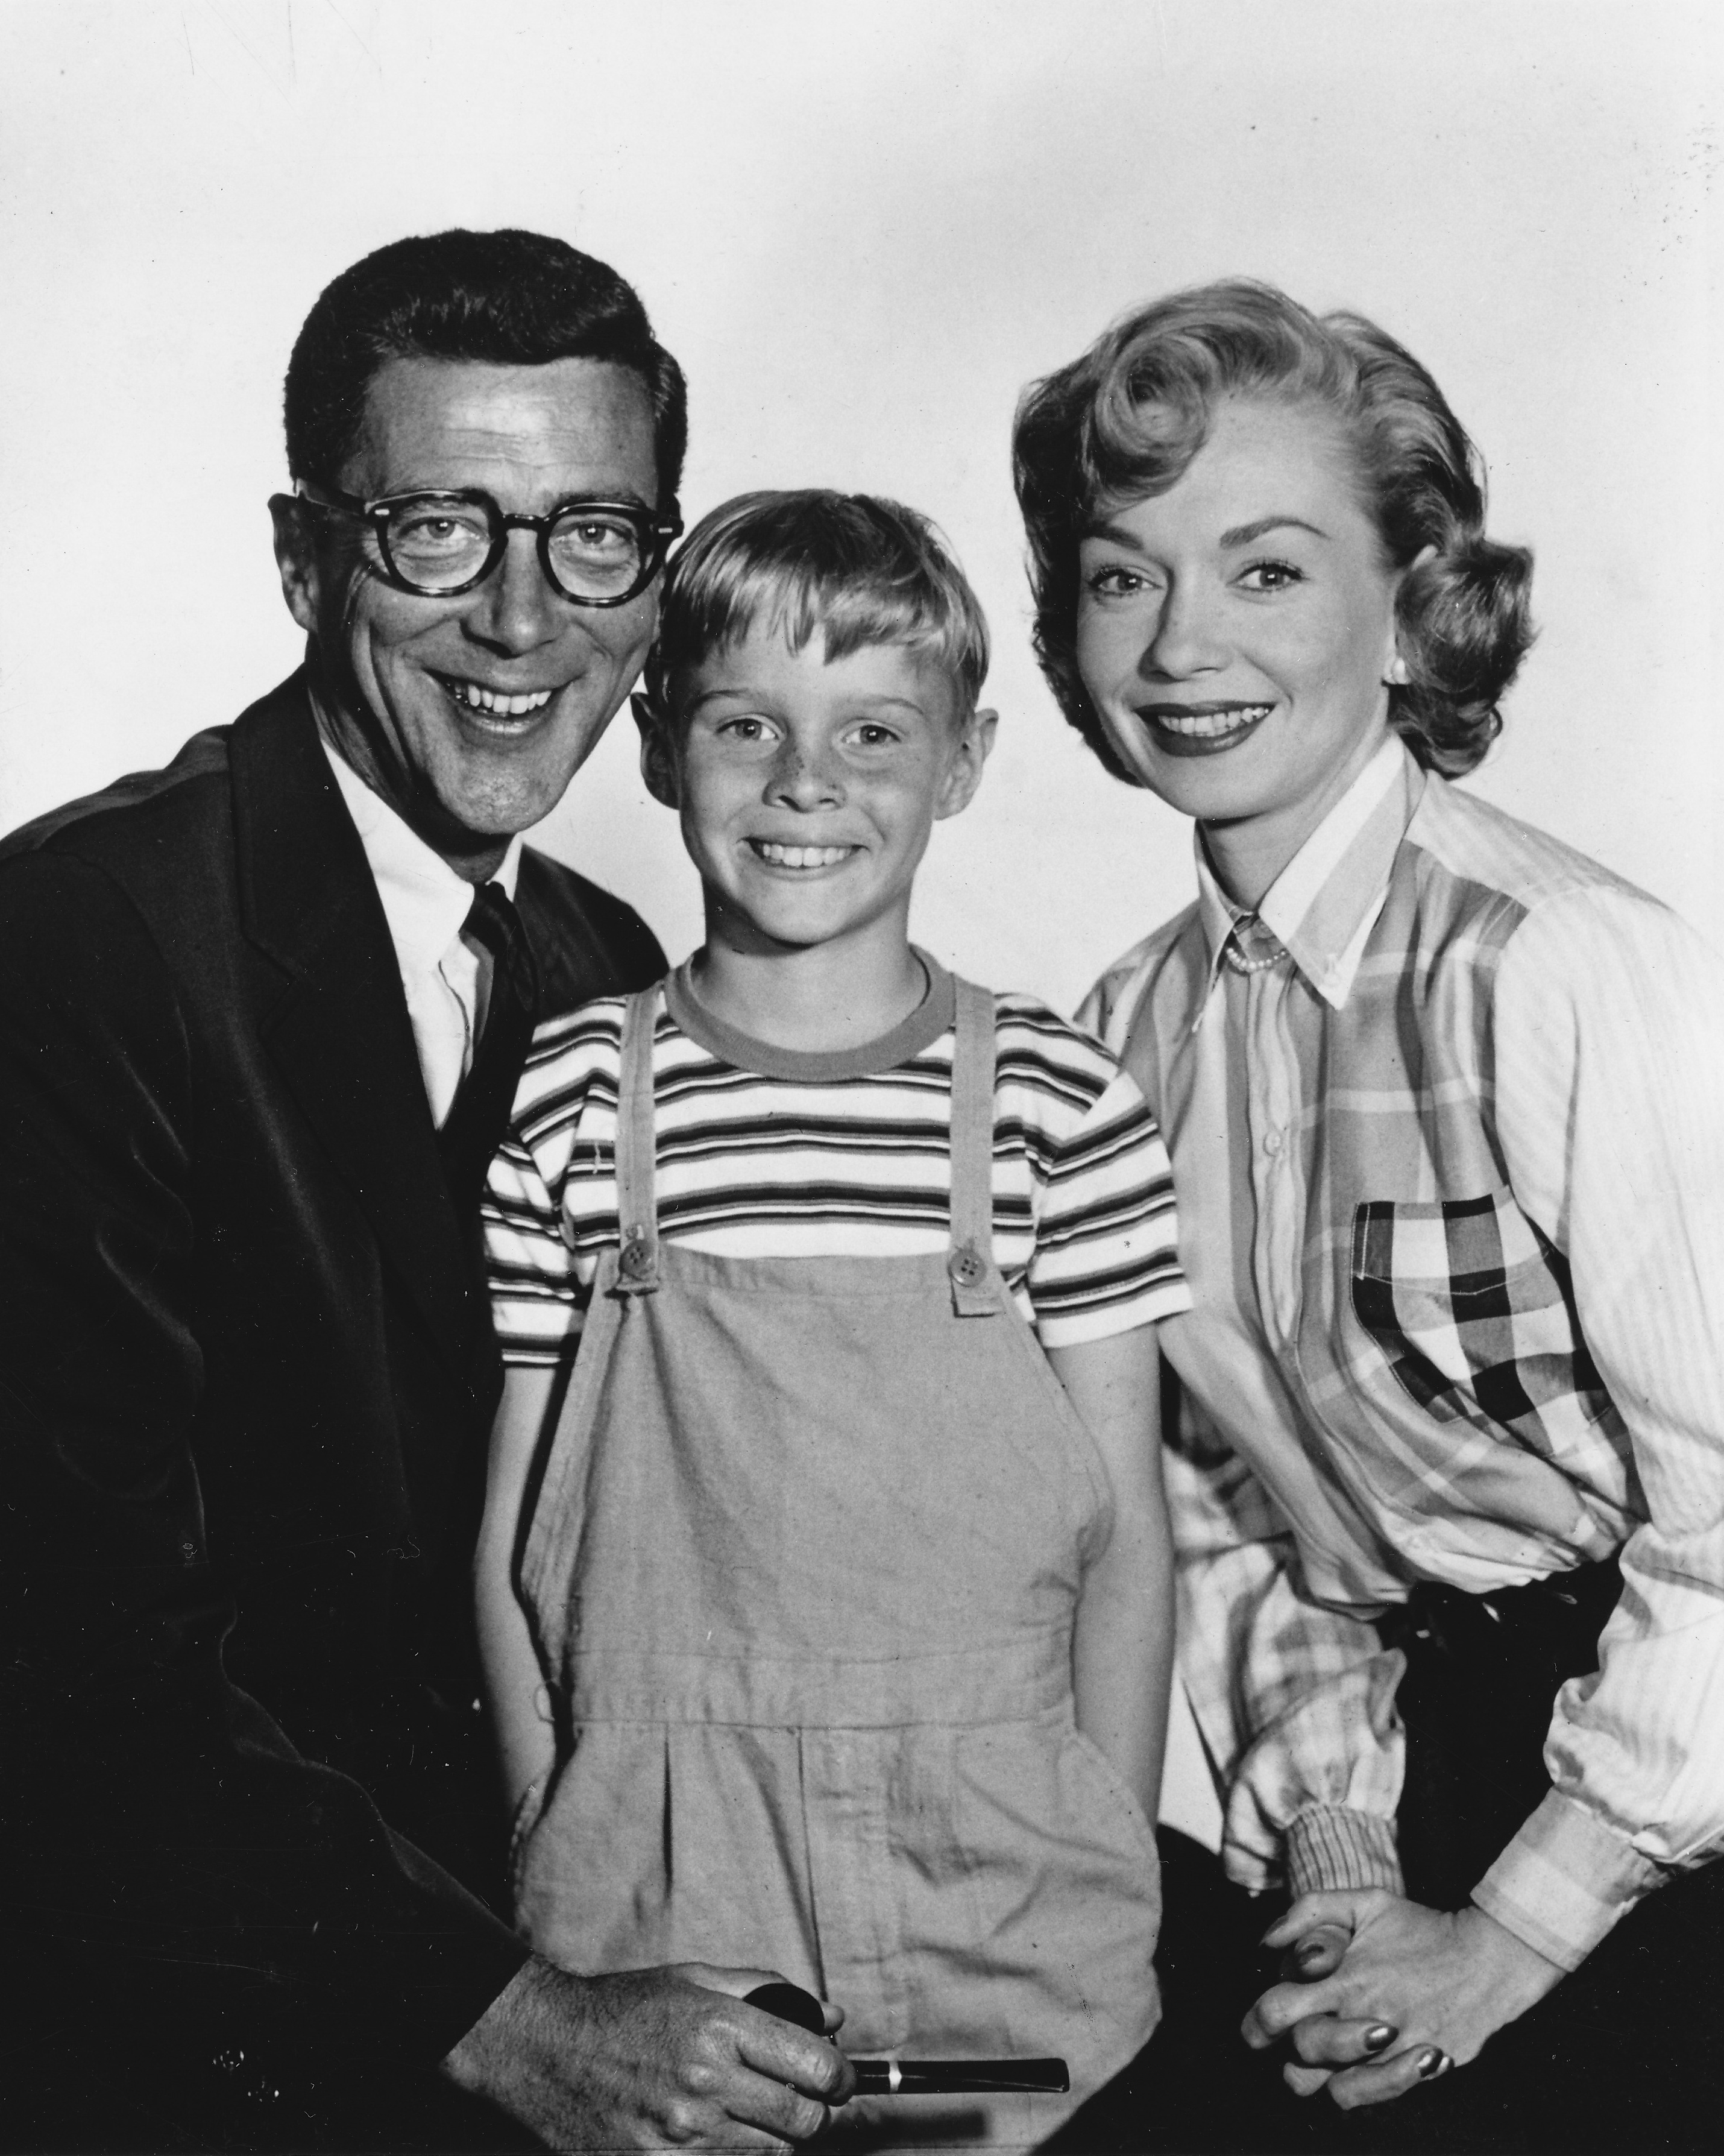 Herbert Anderson (left) with his co-stars of ''[[Dennis the Menace (1959 TV series)|Dennis the Menace]]'', [[Gloria Henry]] and [[Jay North]] (1959)